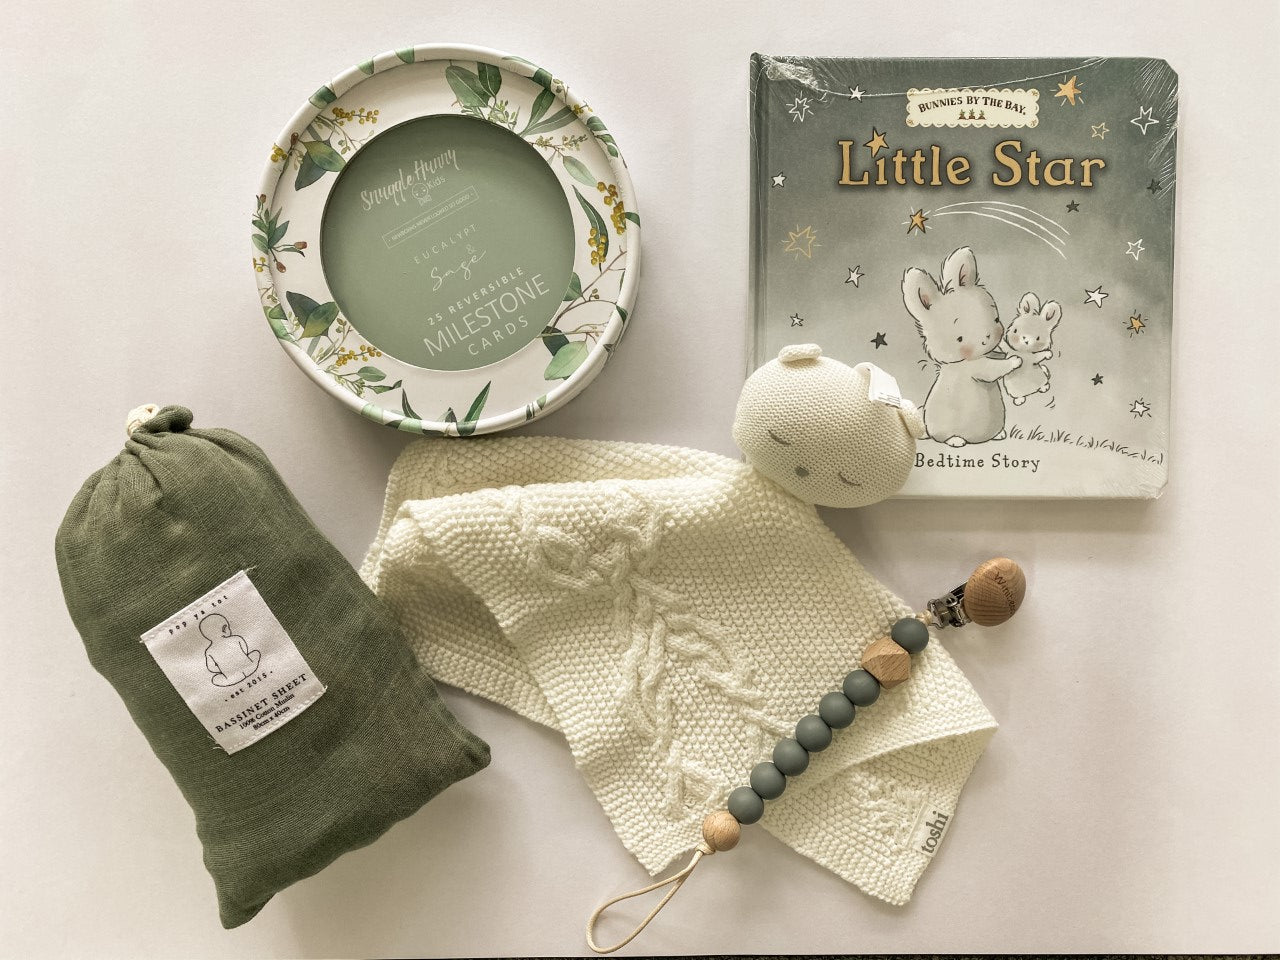 Unisex Baby Gifts